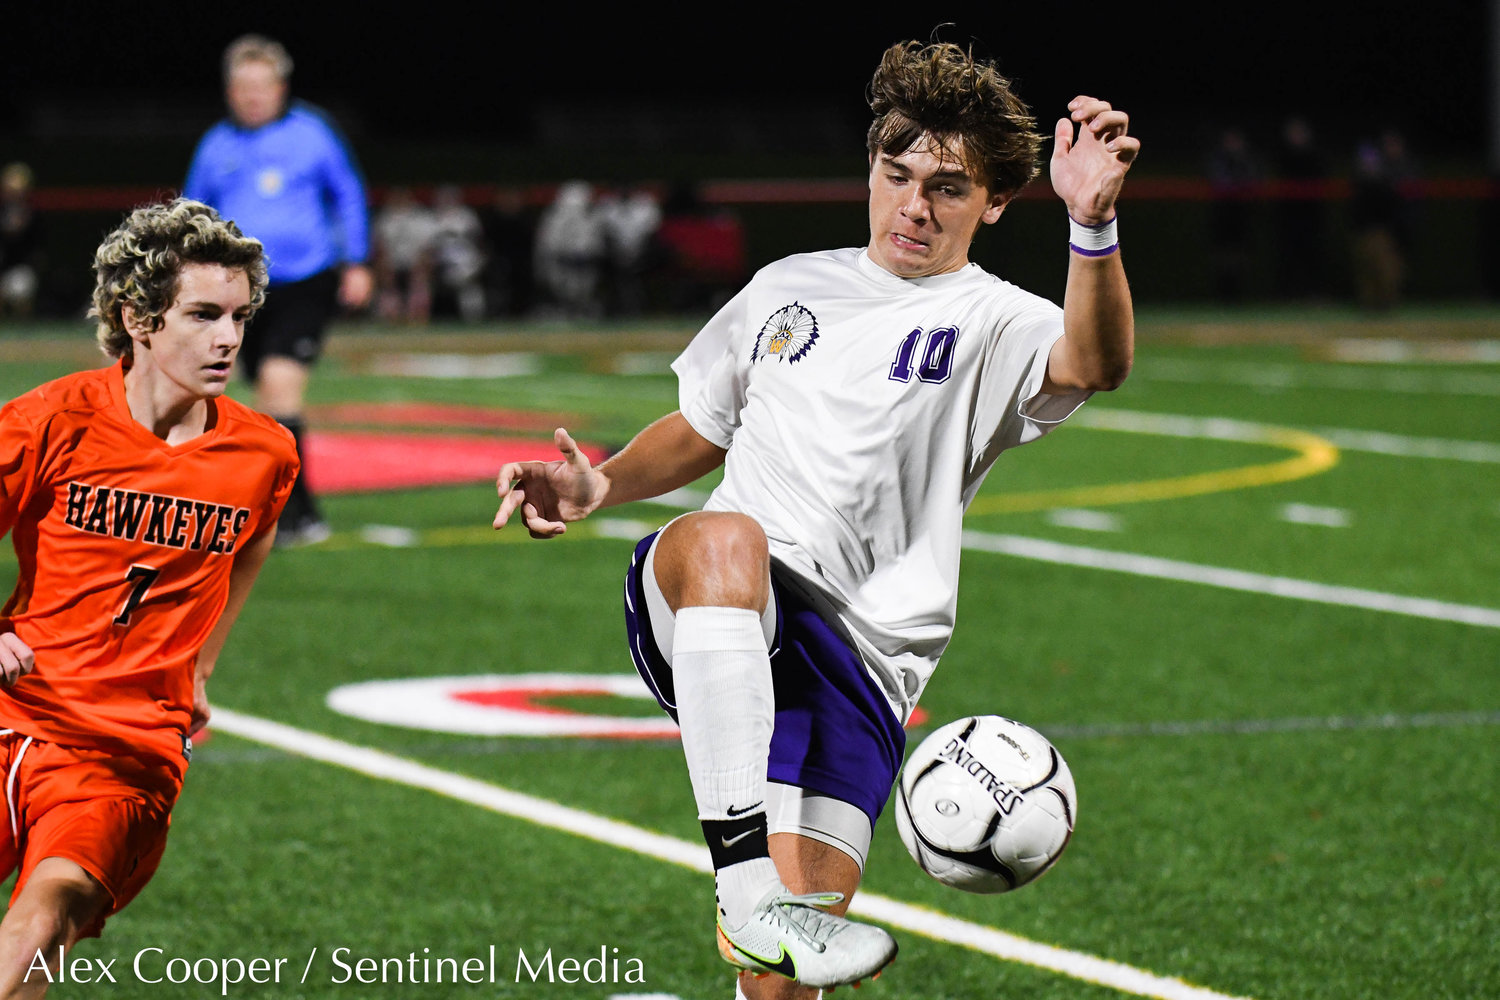 Waterville player Connor Stanton (10) settles a loose ball as Cooperstown player Cooper Bradly (7) defends during the Section III Class C final on Tuesday, Nov. 1 at VVS High School. Cooperstown won 1-0 in overtime.